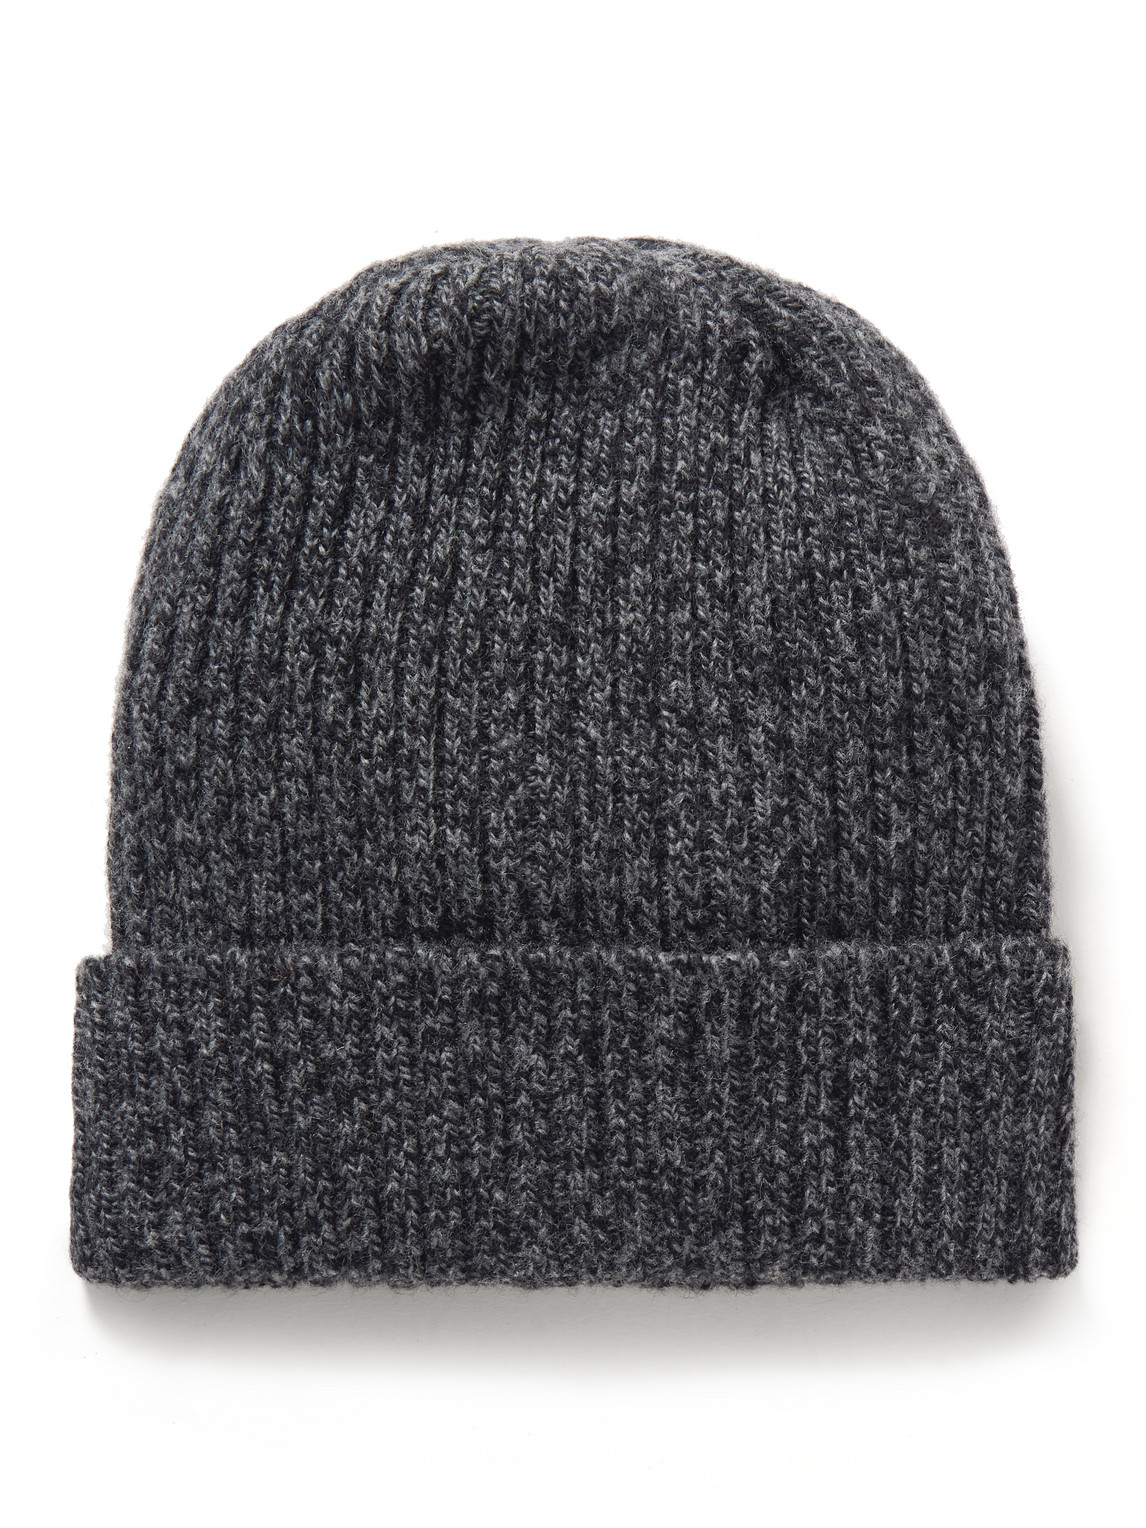 Throwing Fits Ribbed Wool Beanie